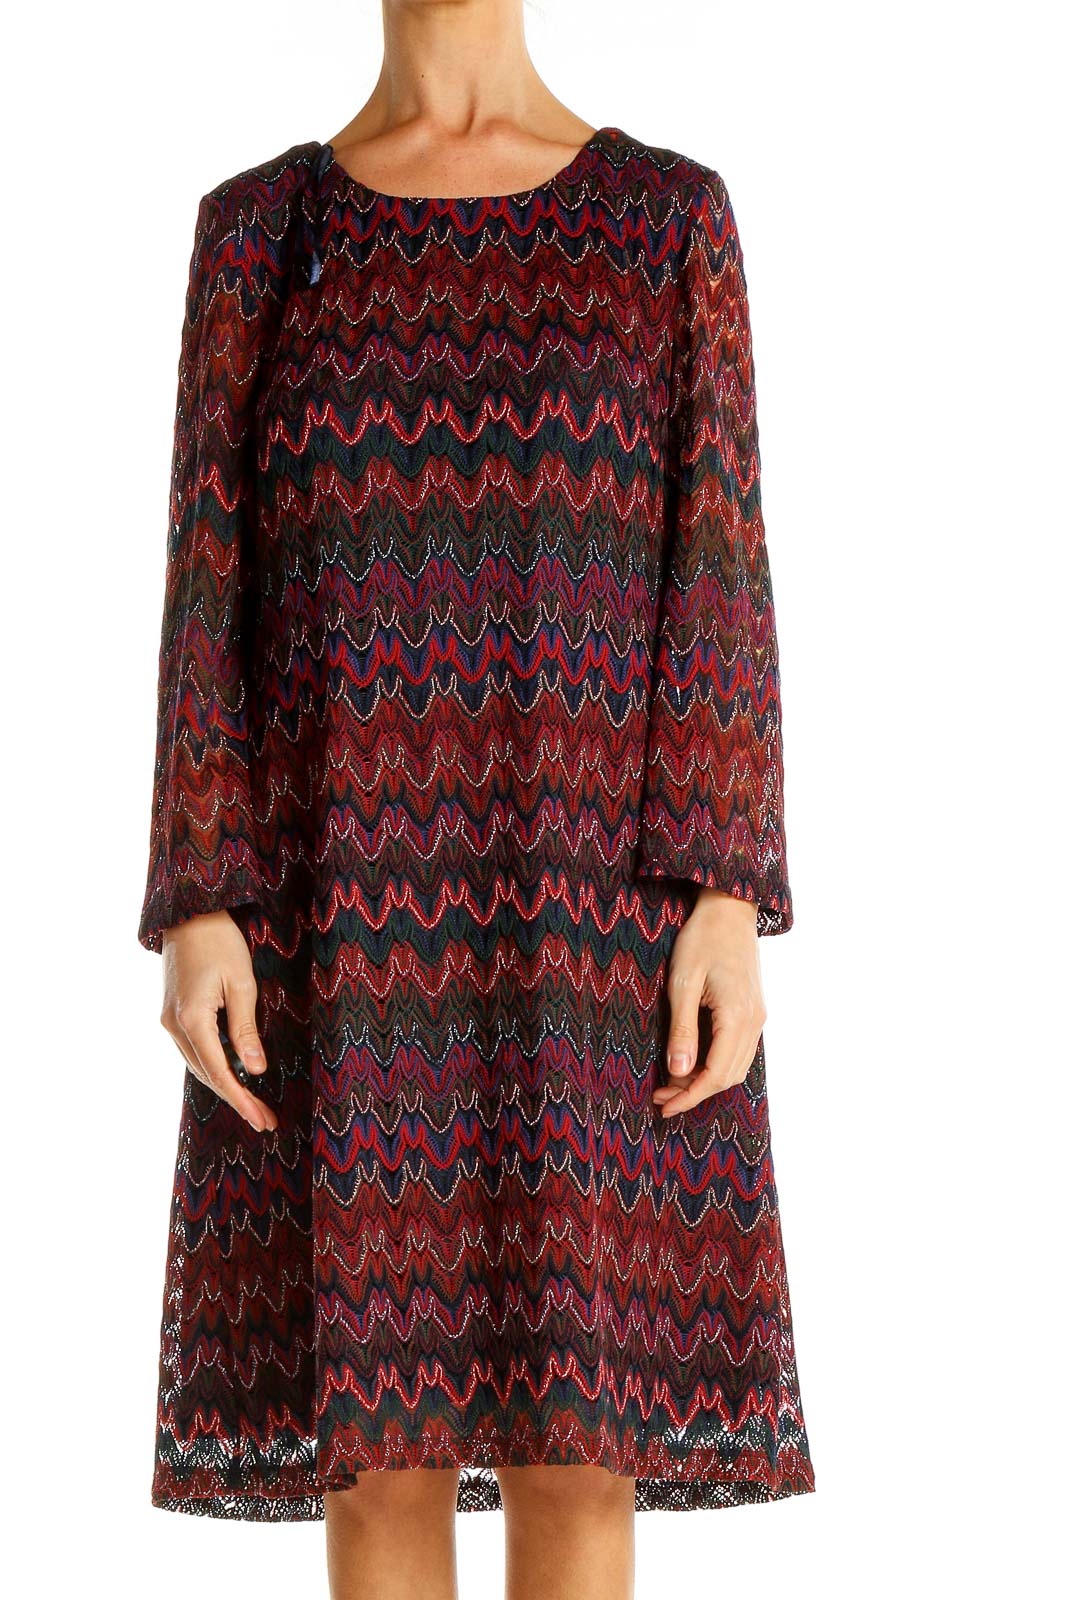 Multicolor Embroidered Bohemian A-Line Dress Front